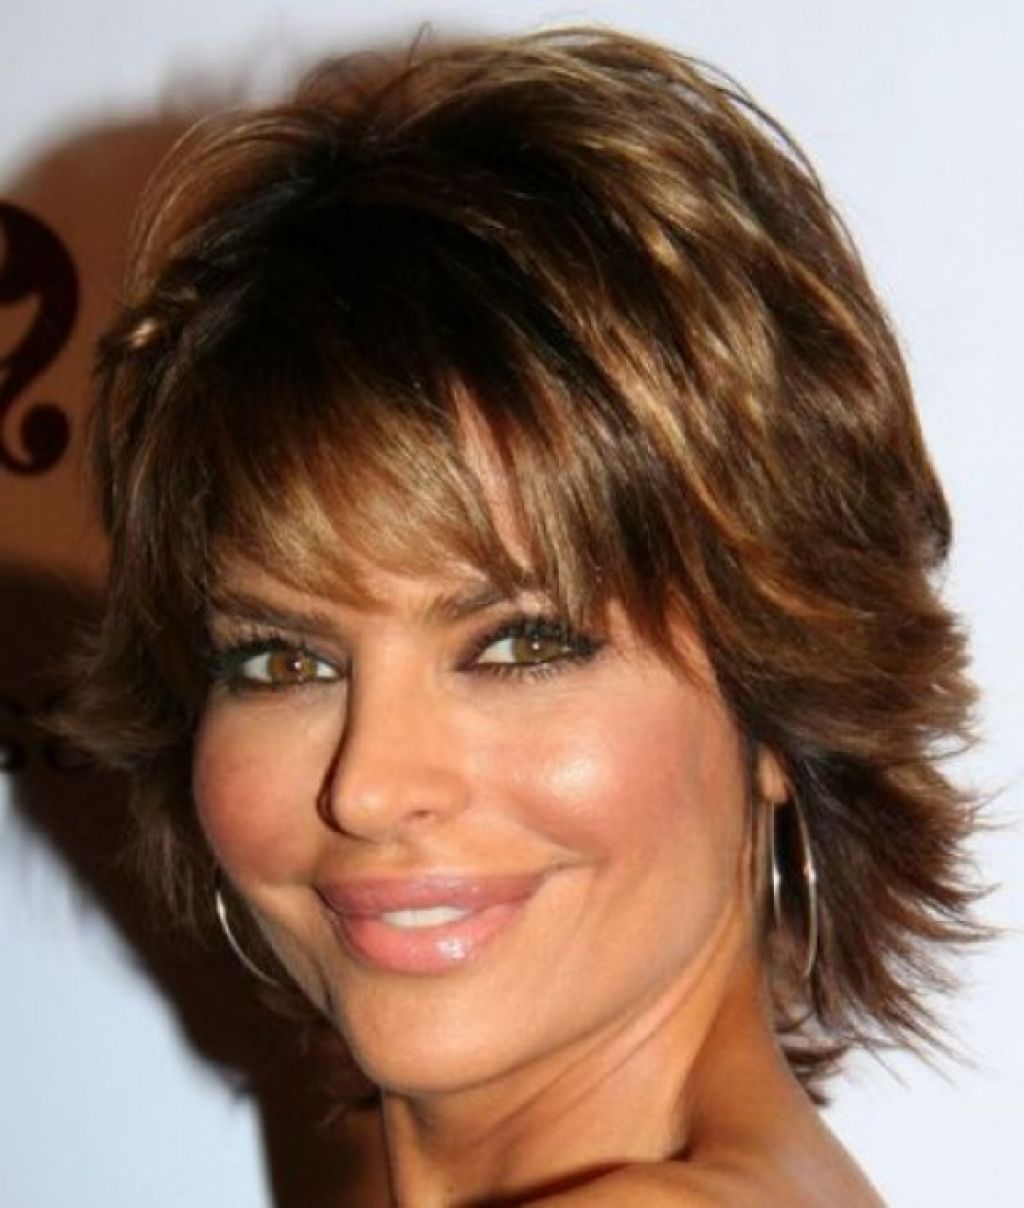 Short Layered Hairstyles For Women Over 50 - The Xerxes